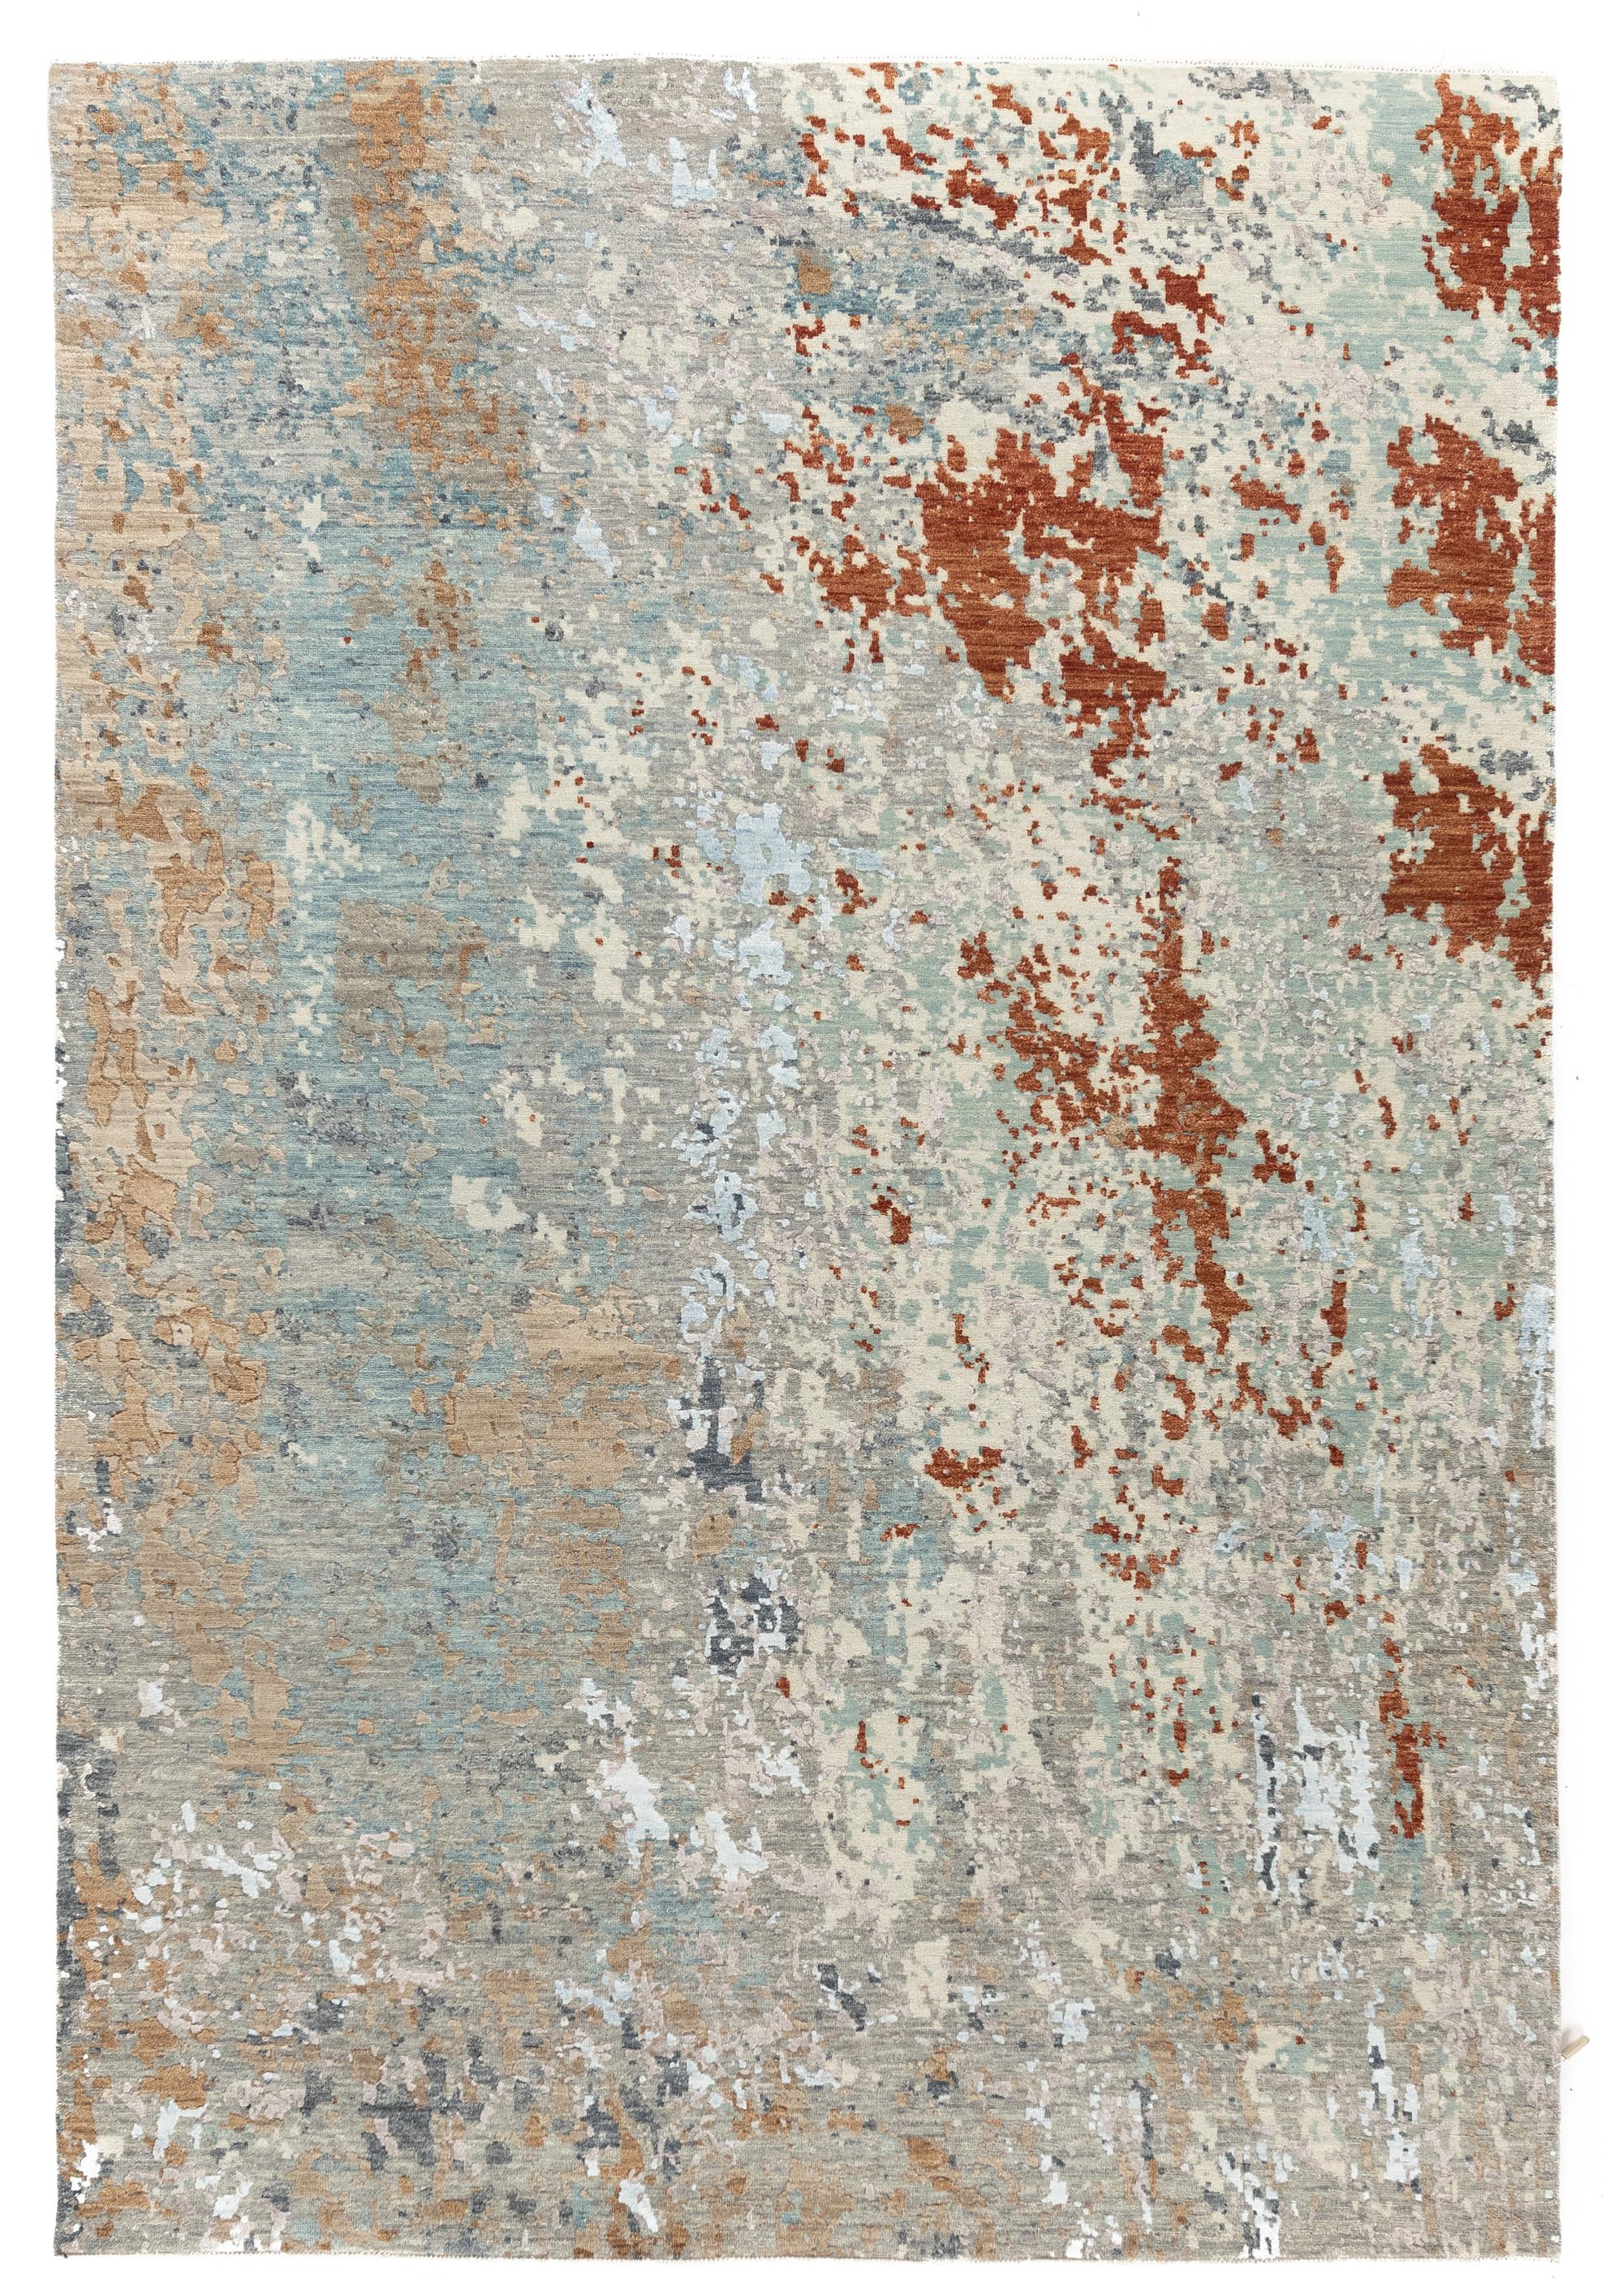 New Indian Contemporary Design Rug <br> 6'1 x 8'10